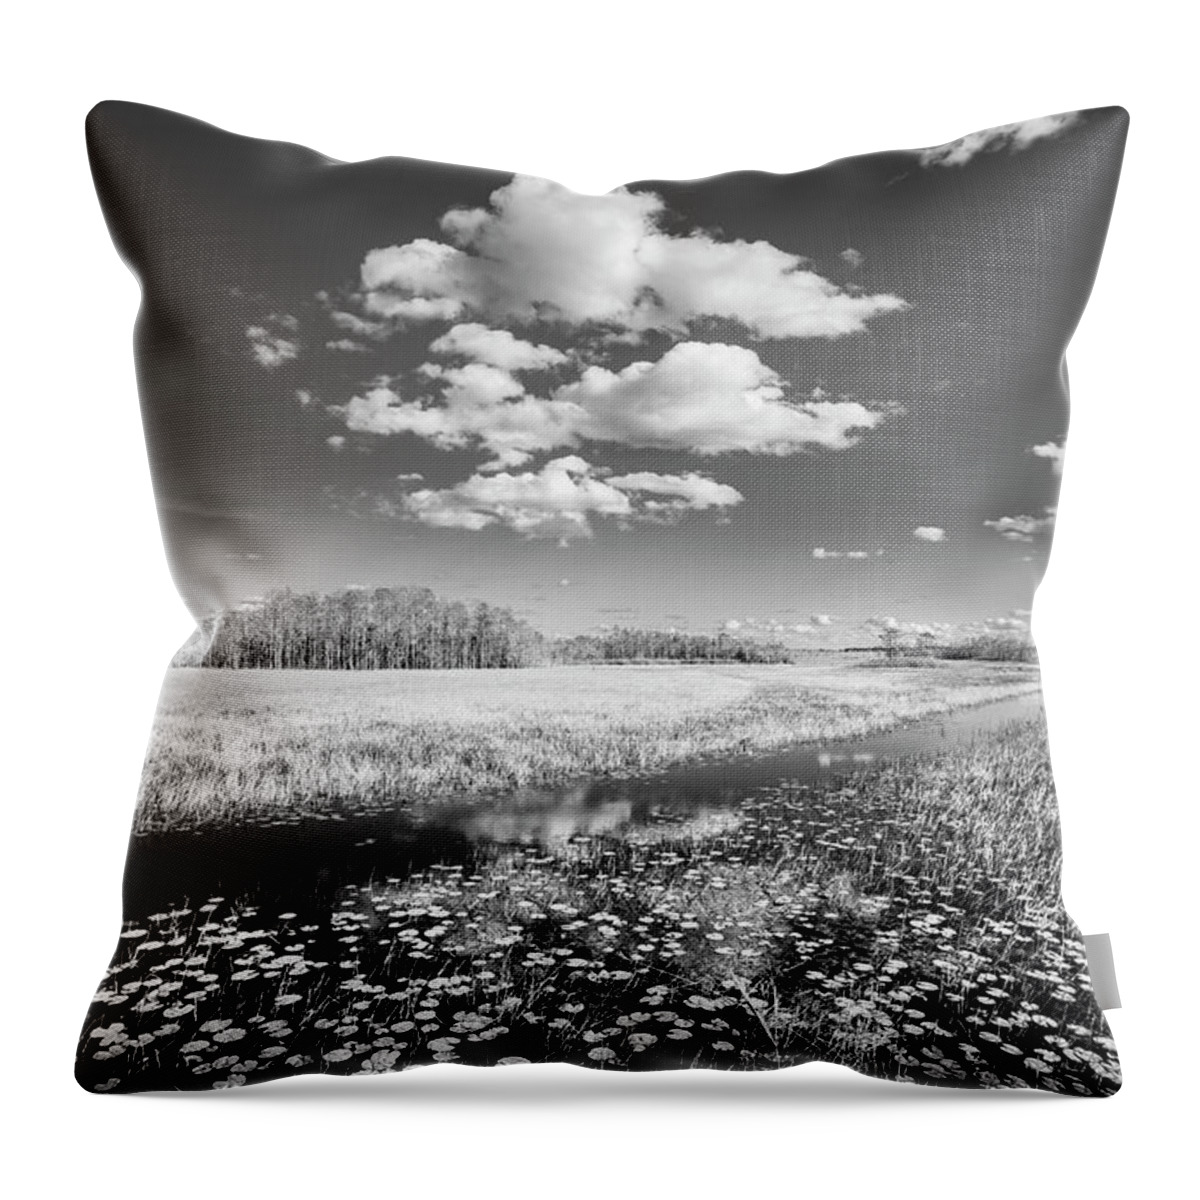 Clouds Throw Pillow featuring the photograph White Clouds over the Marsh in Black and White by Debra and Dave Vanderlaan